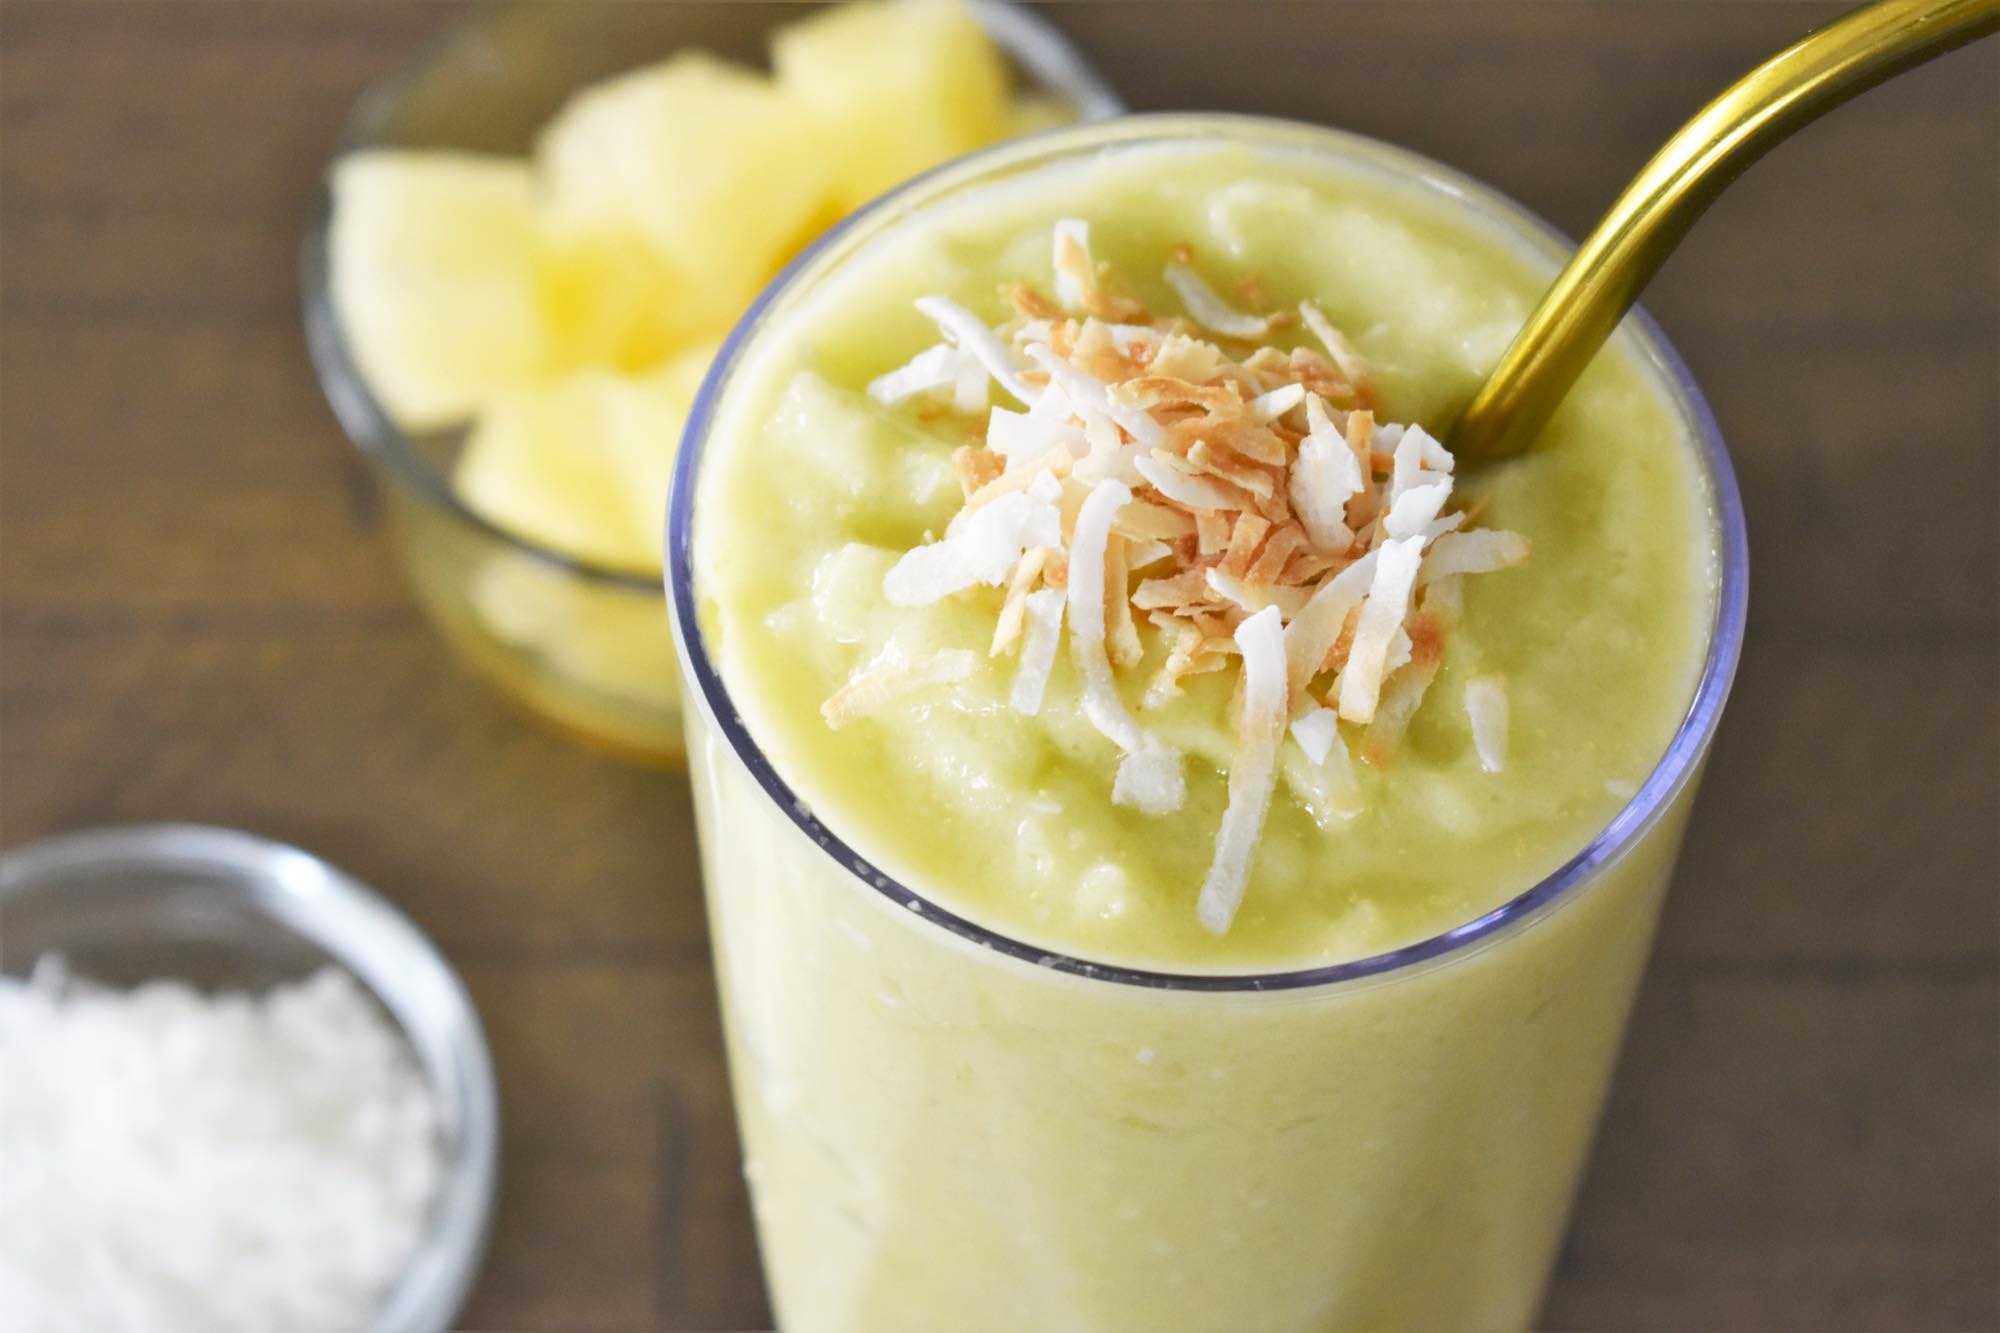 Learn how to make this easy avocado pineapple smoothie by top Hawaii blog Hawaii Travel with Kids. Image of a green smoothie topped with toasted coconut.